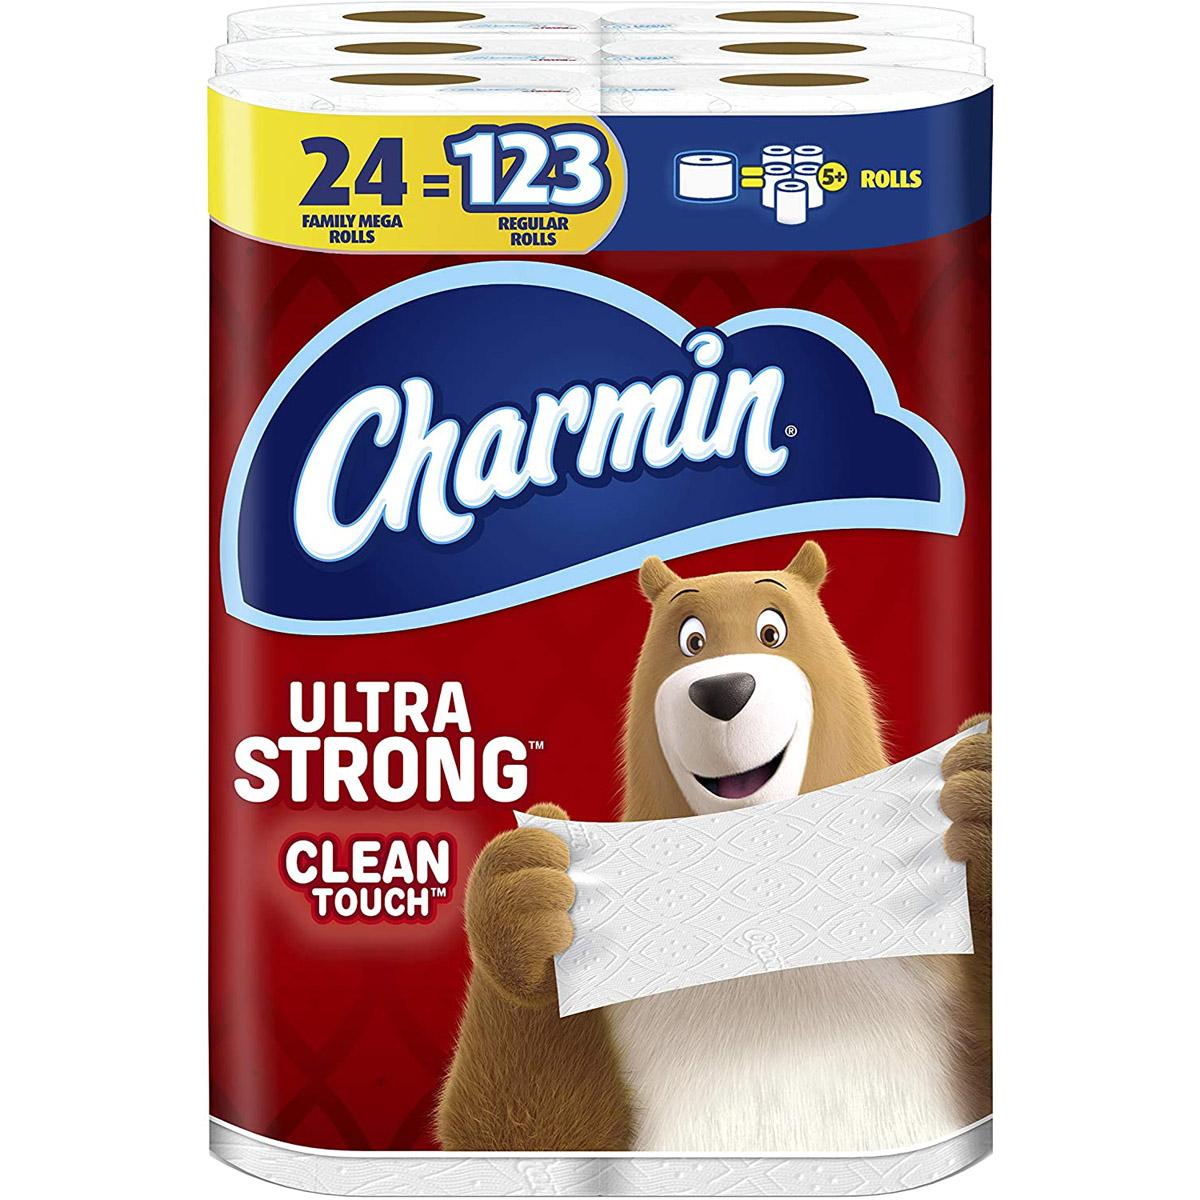 48 Charmin Ultra Strong Clean Touch Toilet Paper Rolls for $40.32 Shipped